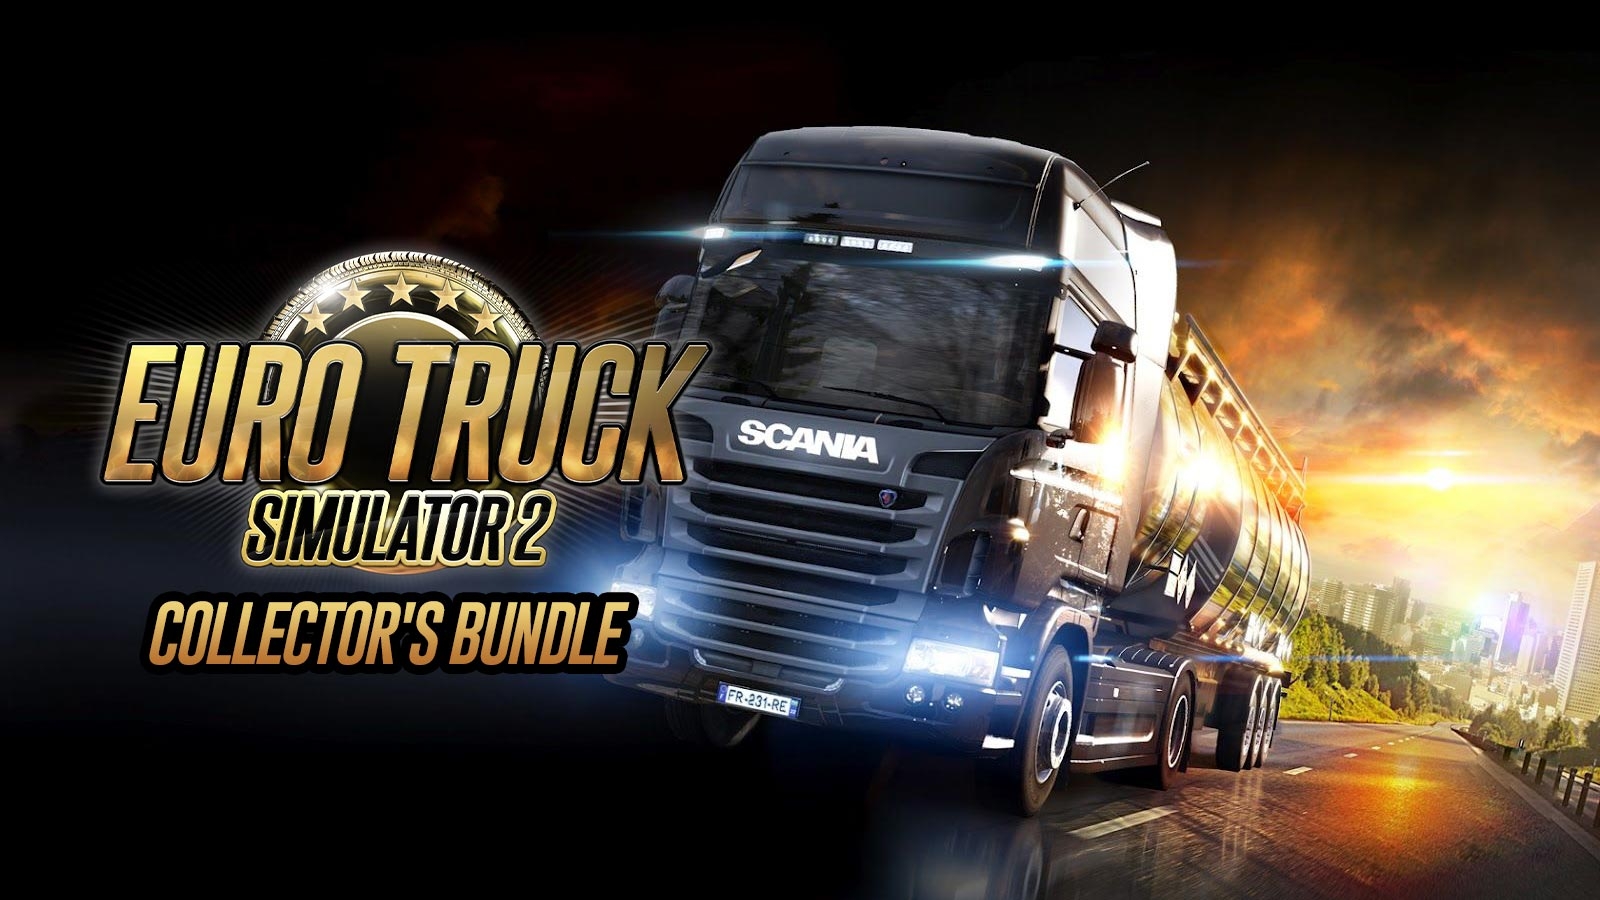 https://gaming-cdn.com/images/products/13673/orig/euro-truck-simulator-2-collector-s-bundle-collector-s-bundle-pc-mac-spiel-steam-cover.jpg?v=1694084363